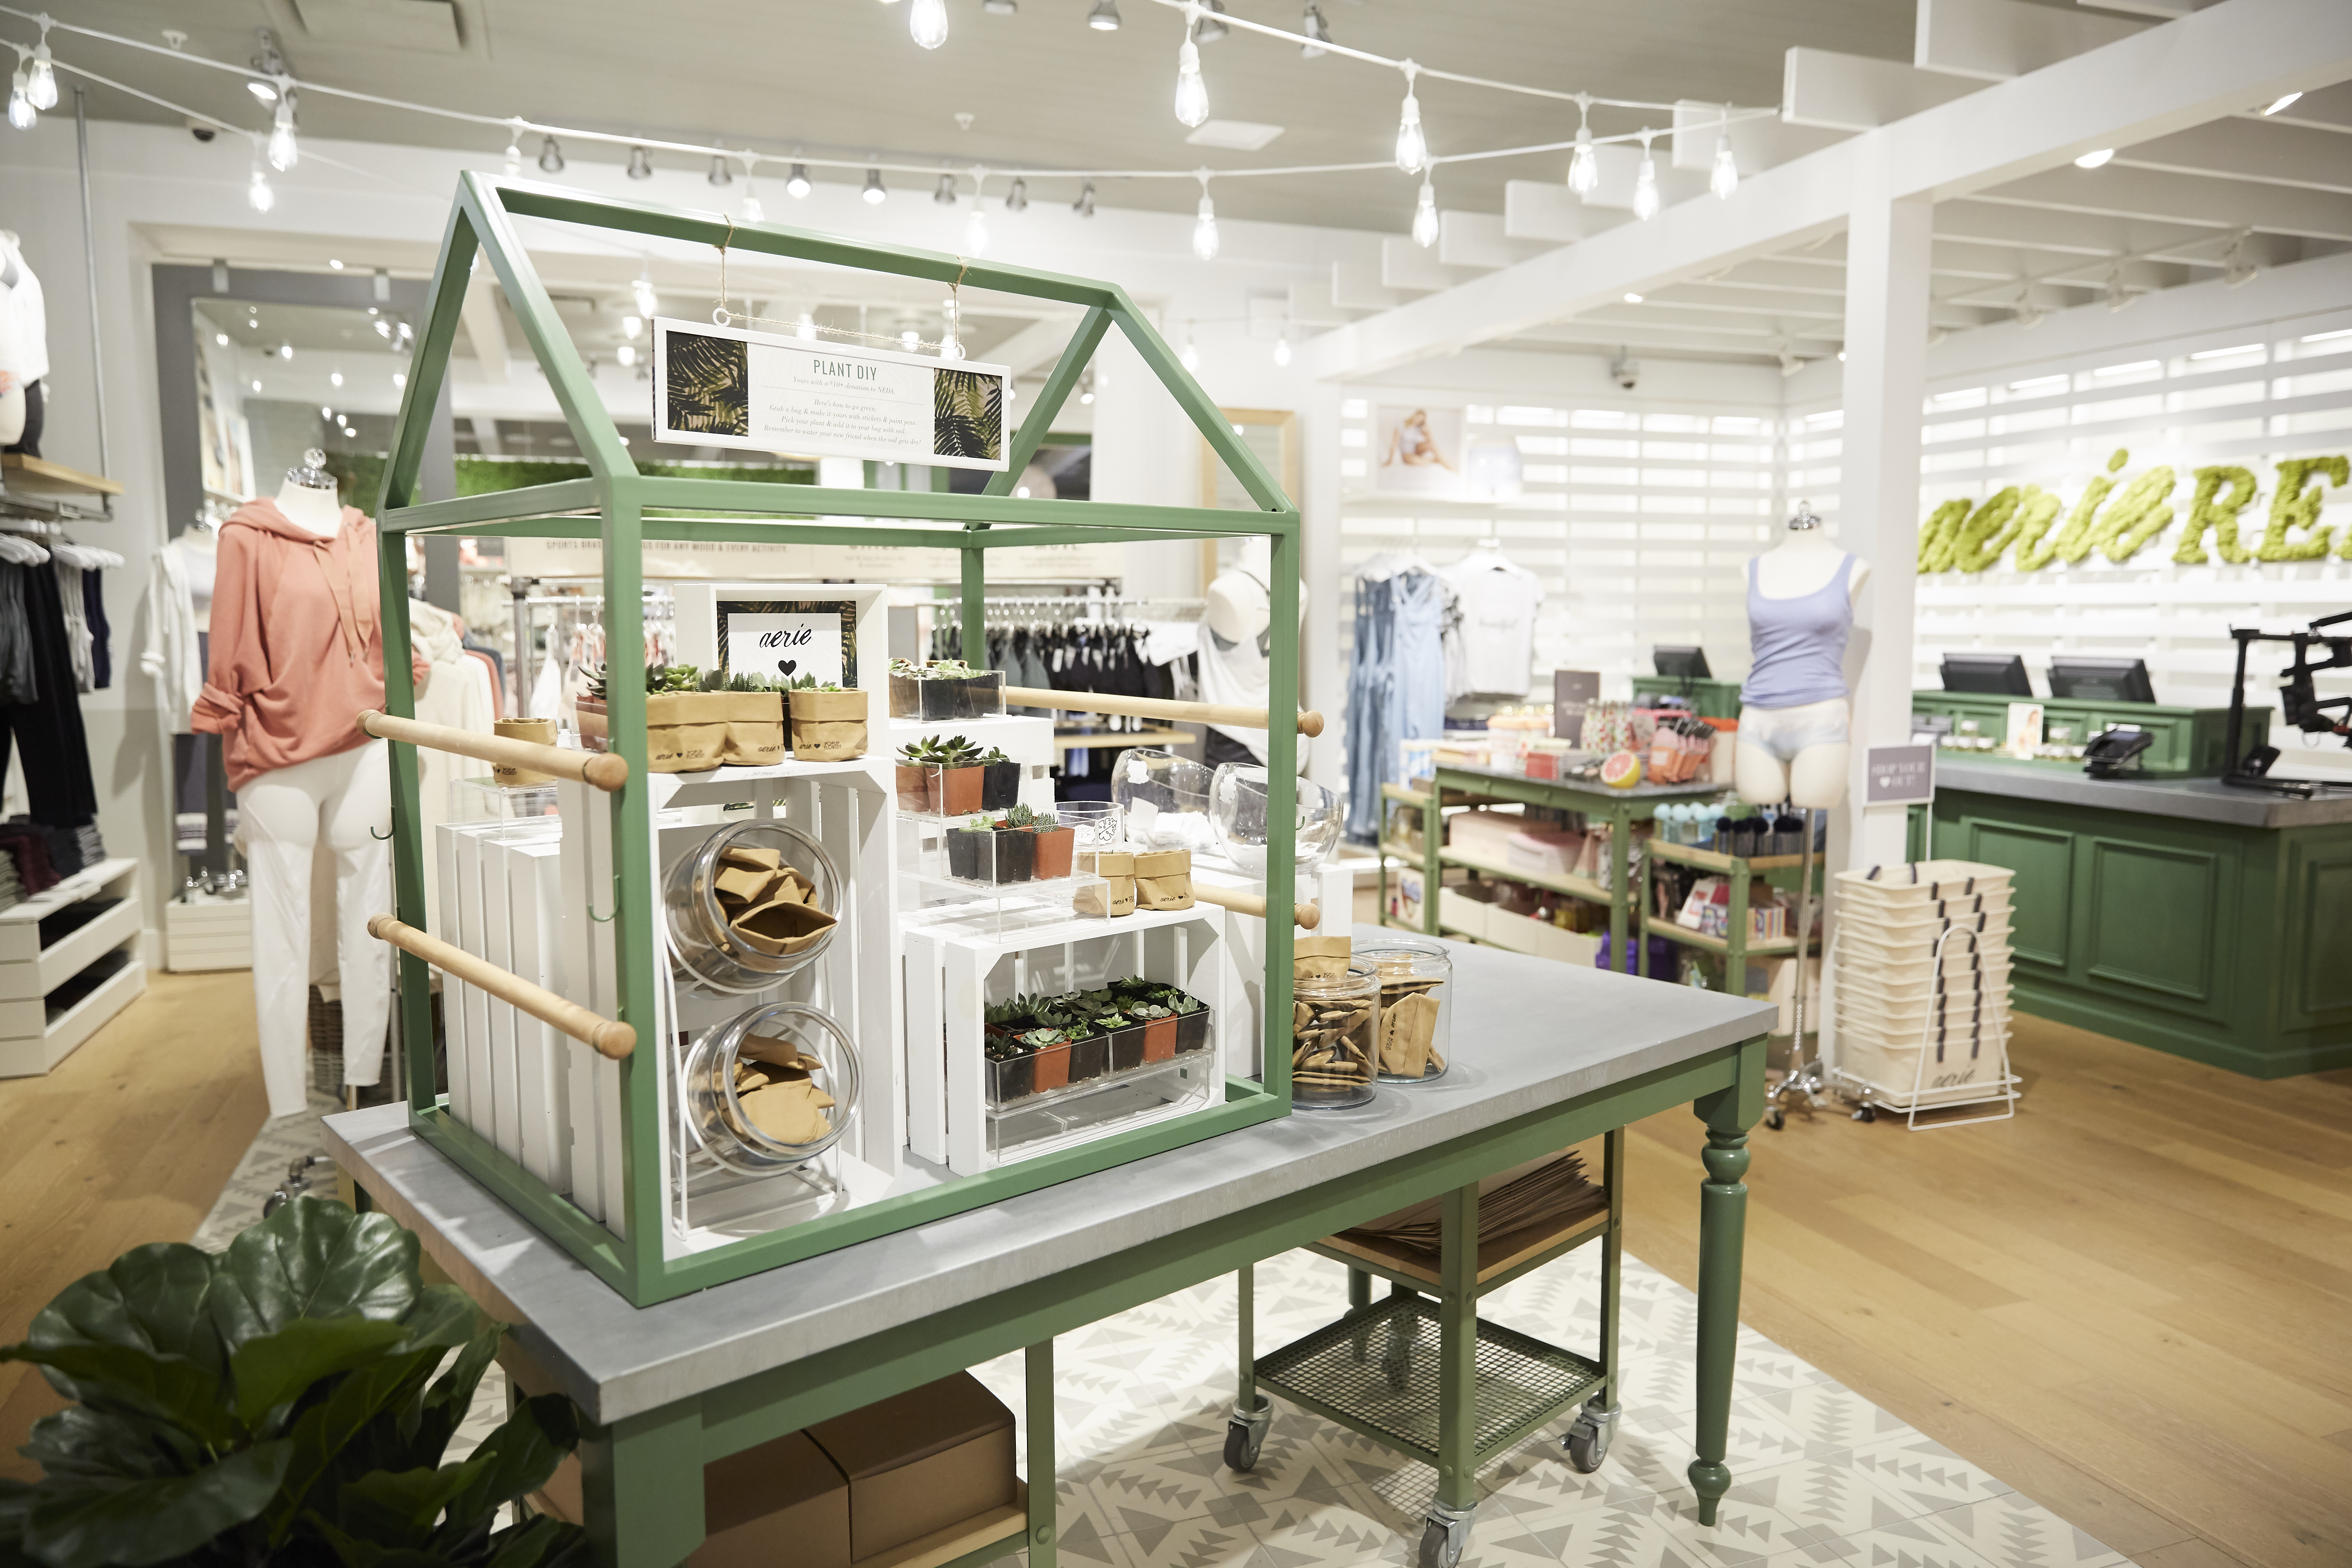 Introducing... An All-New Aerie Store Design!